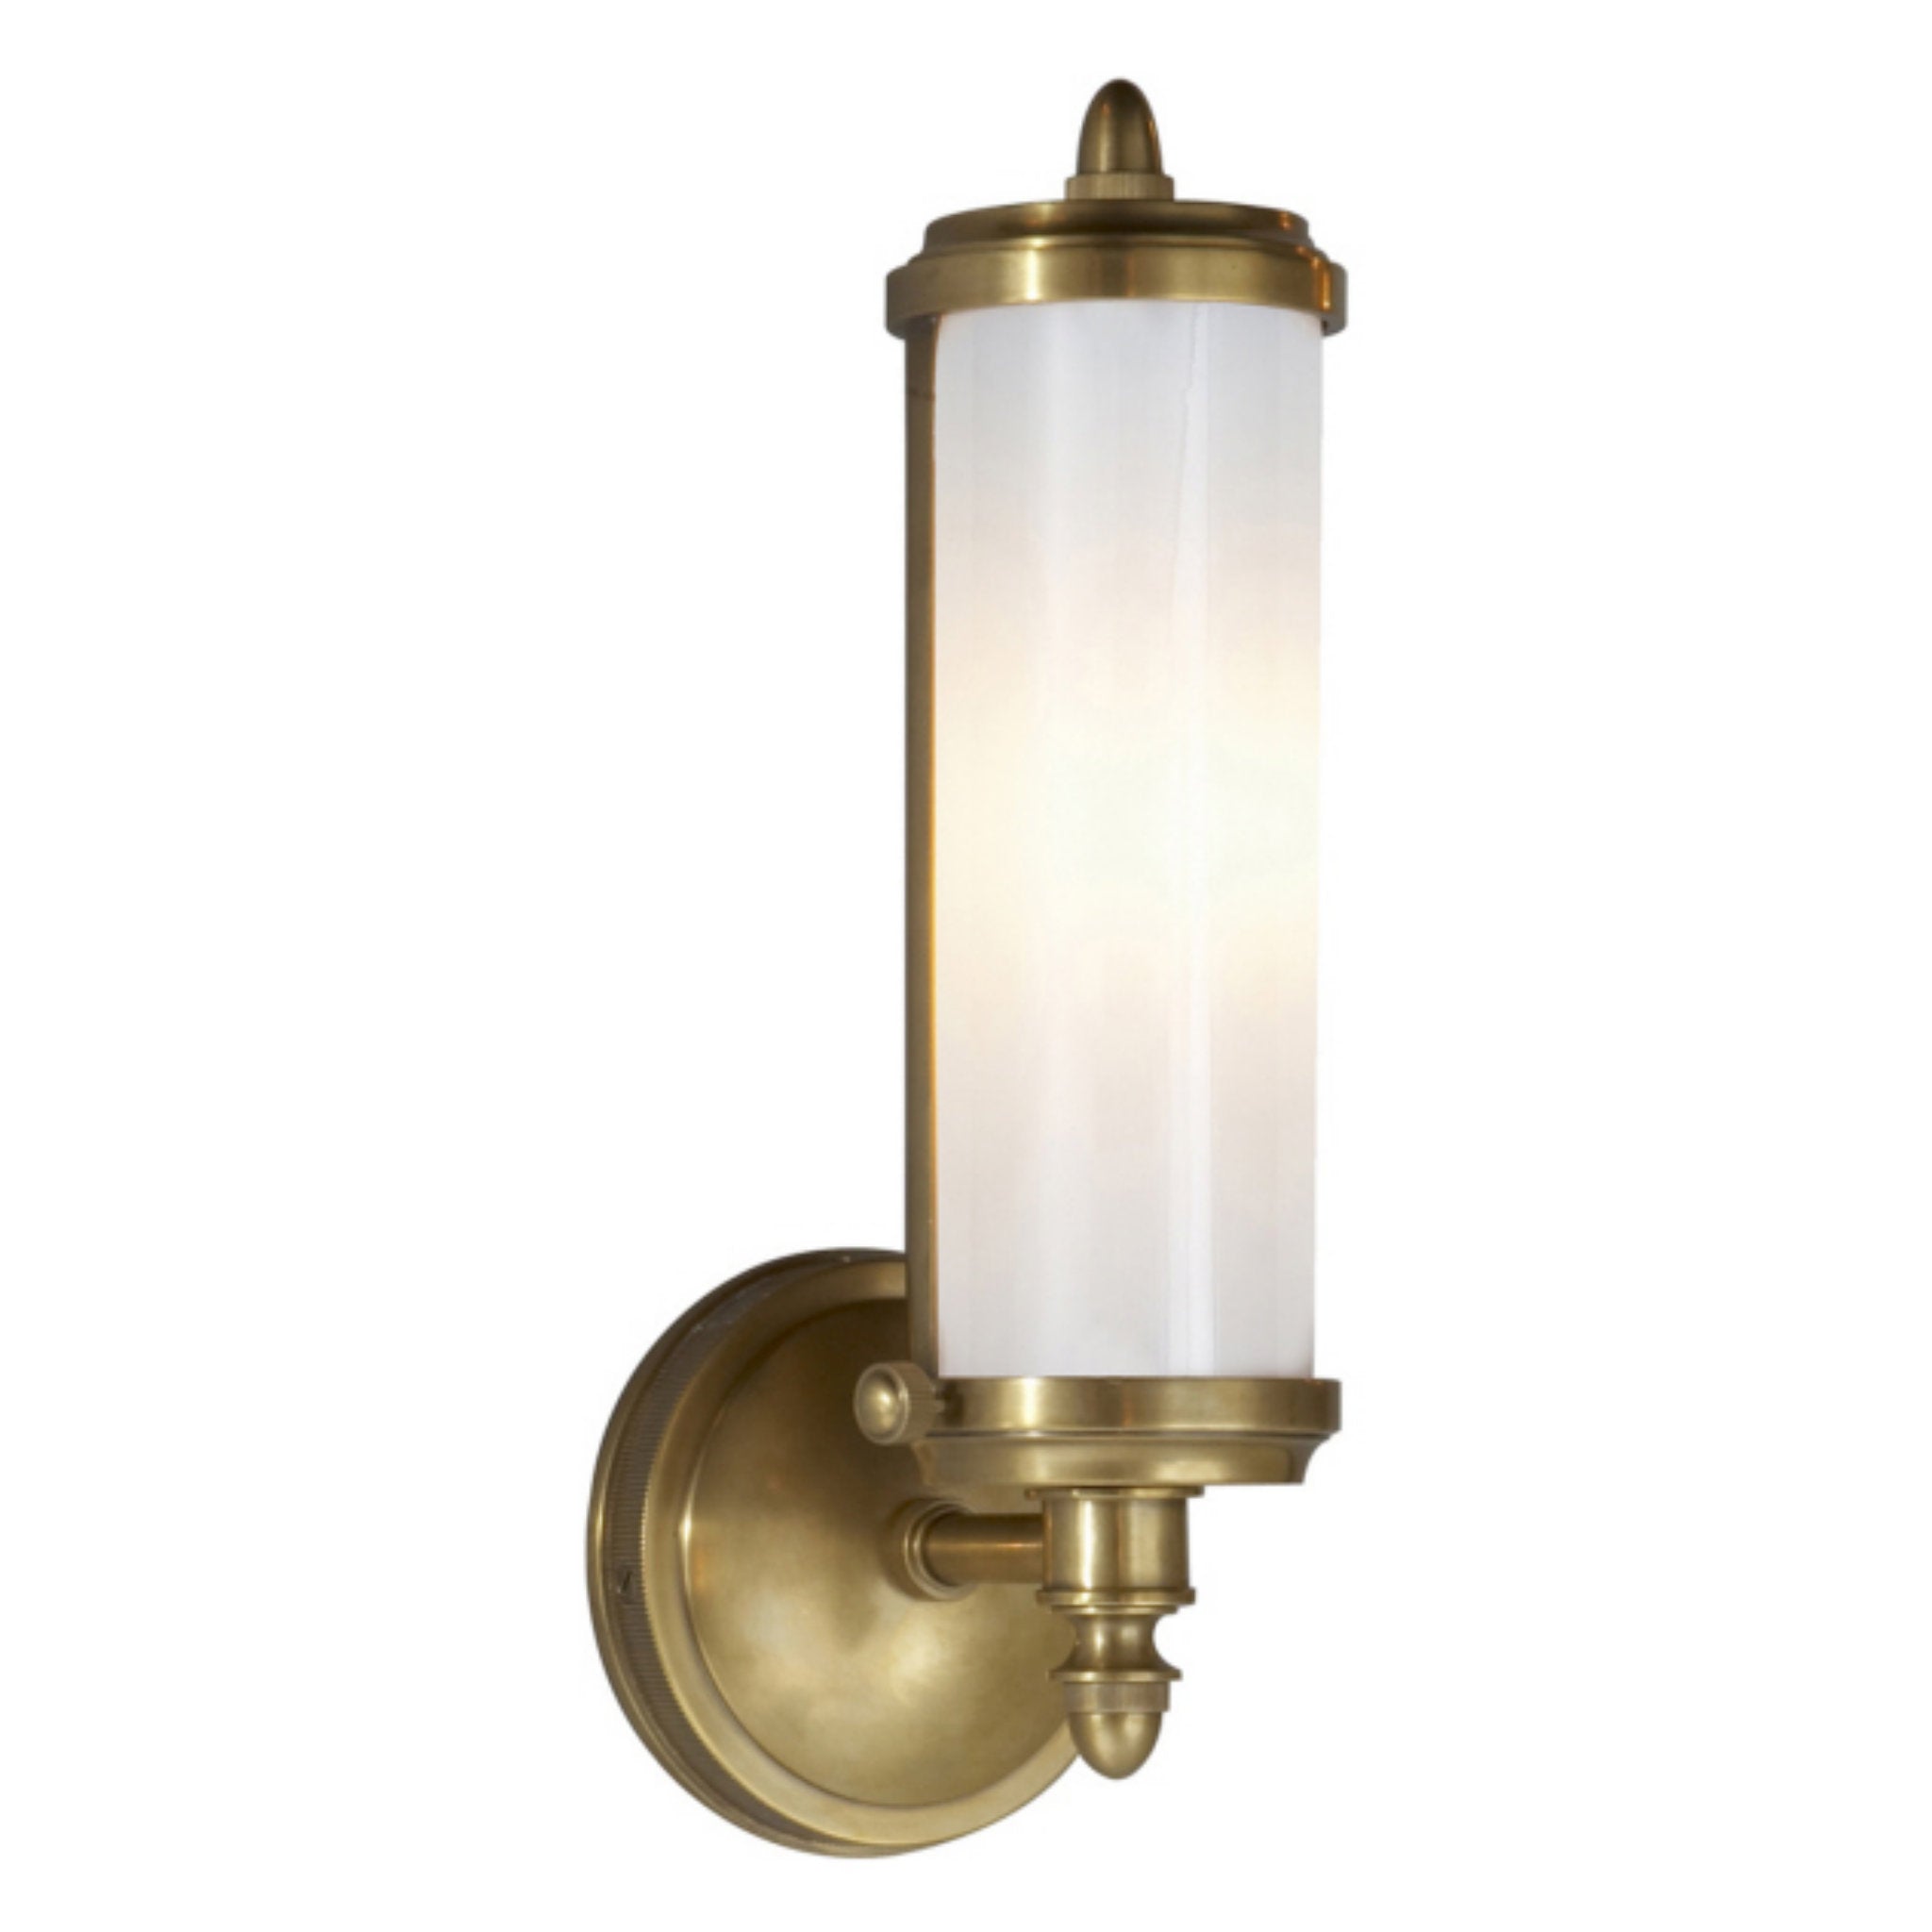 TOB2184HABWG by Visual Comfort - Calliope Short Bath Light in Hand-Rubbed  Antique Brass with White Glass